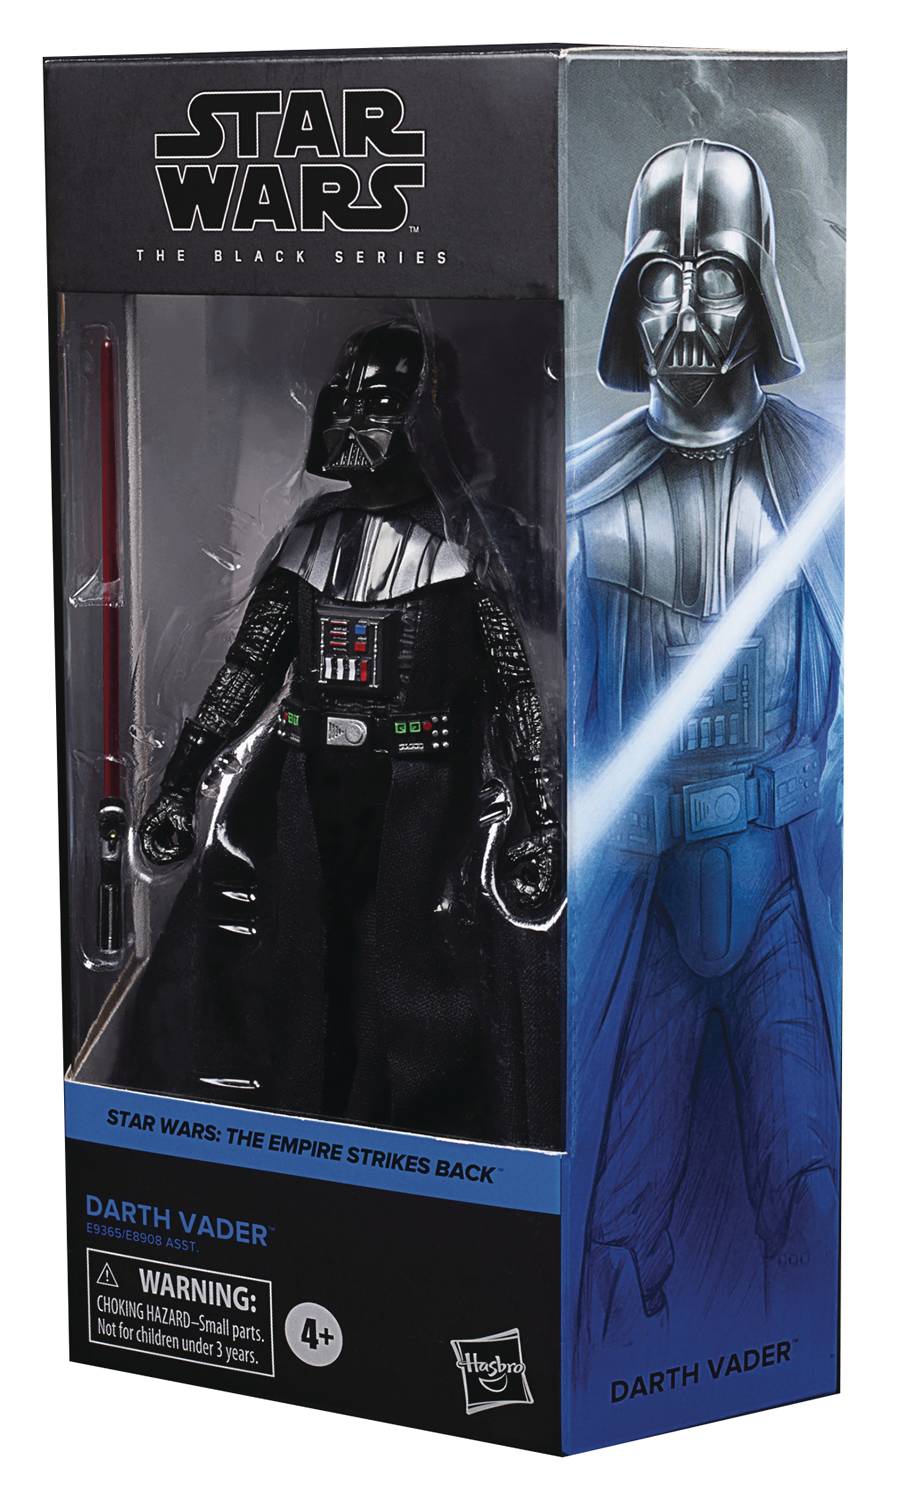 E9365 for sale online Hasbro Star Wars The Black Series Darth Vader 6 inch Action Figure 